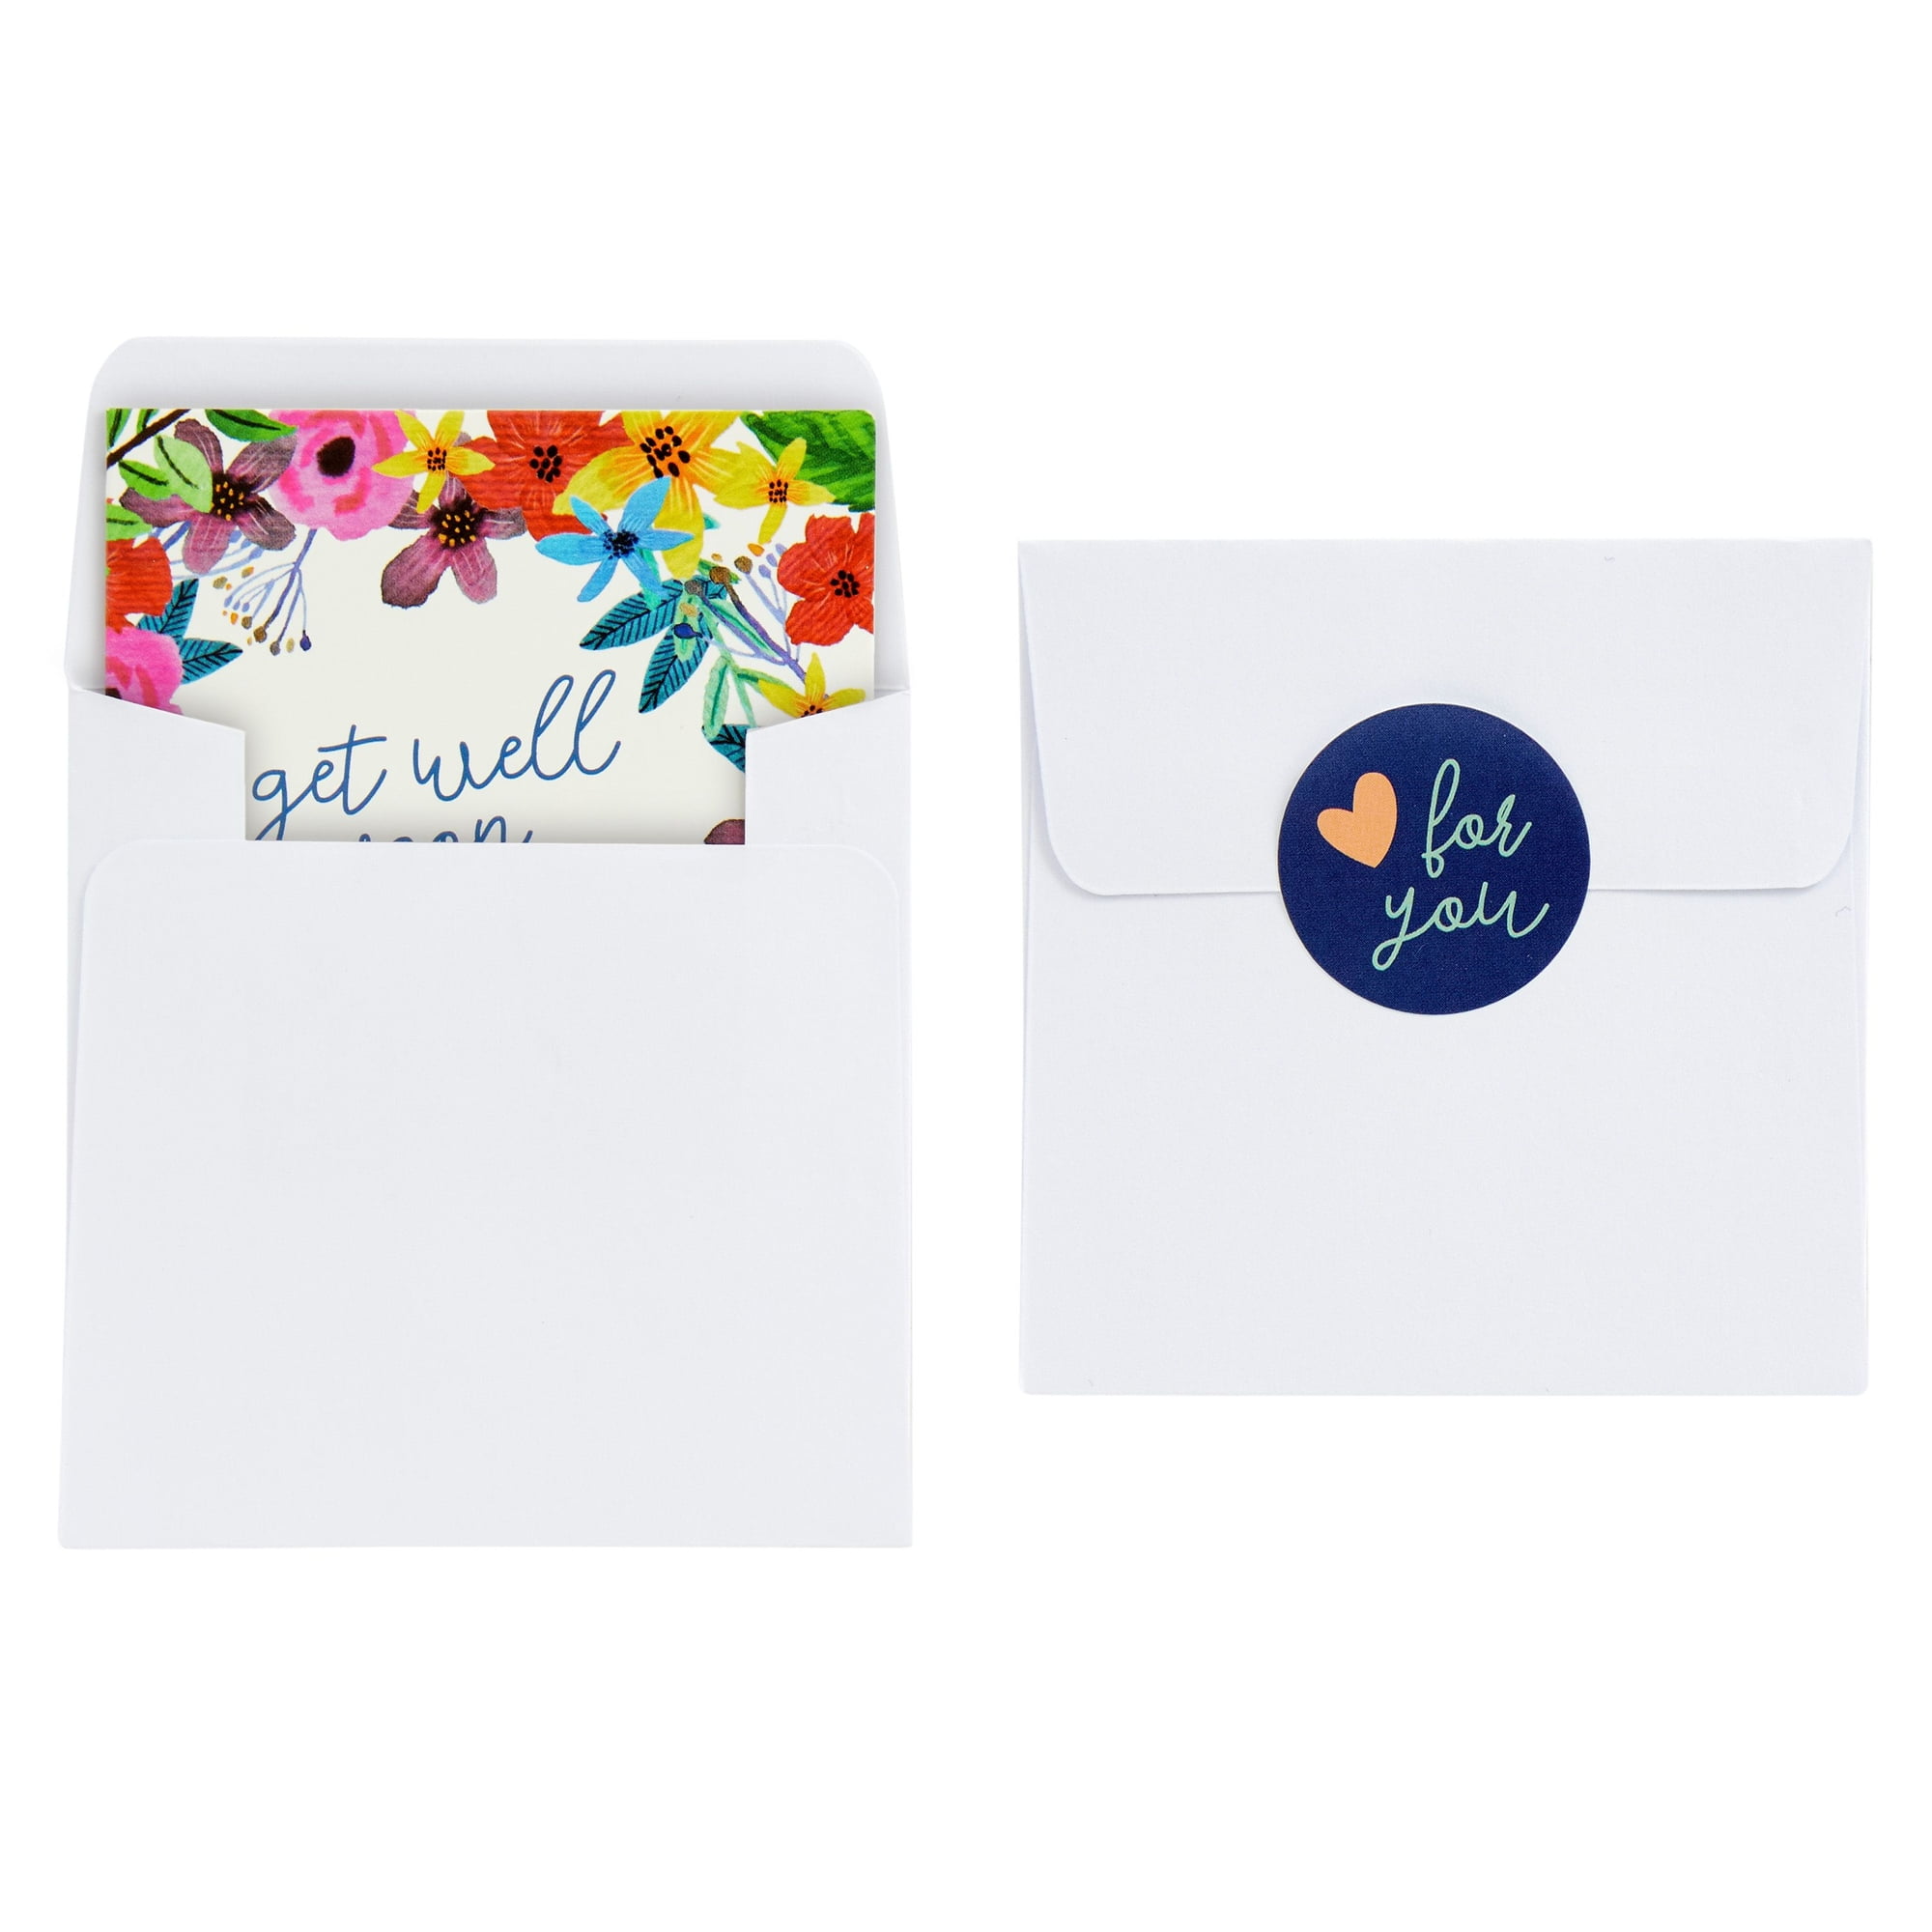 A Little Gift For You - Mini Card Set